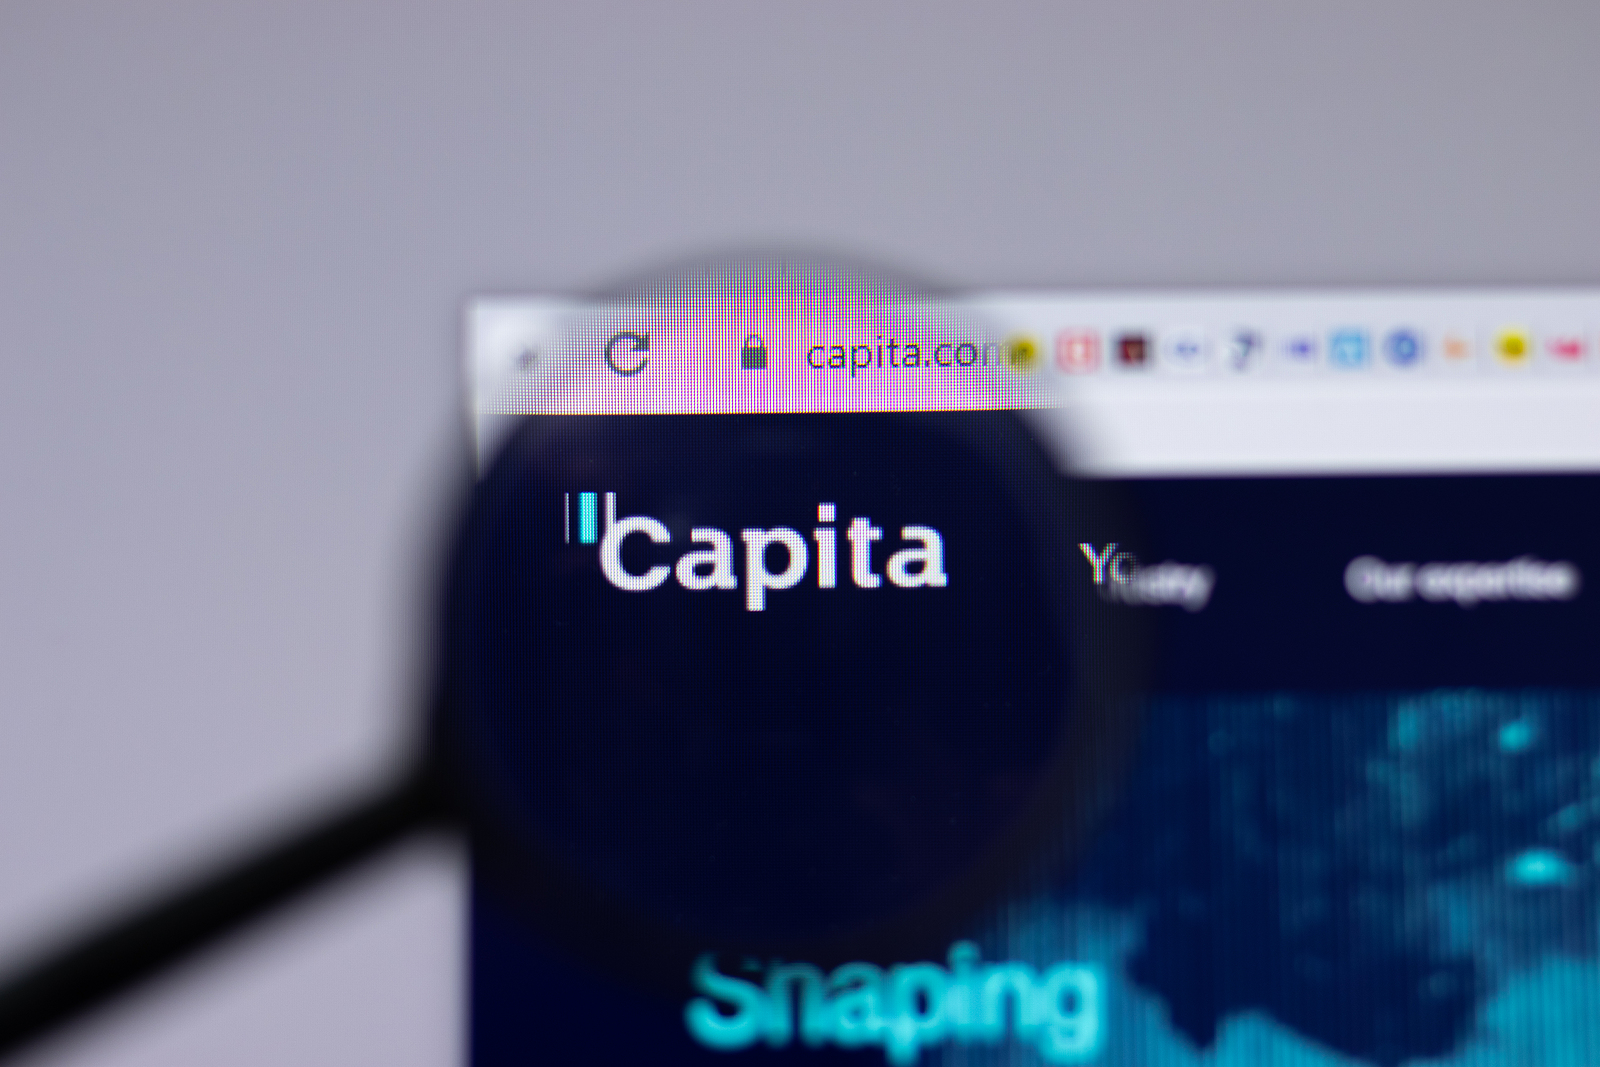 capita-confirms-data-breach-after-ransomware-group-offers-to-sell-stolen-information